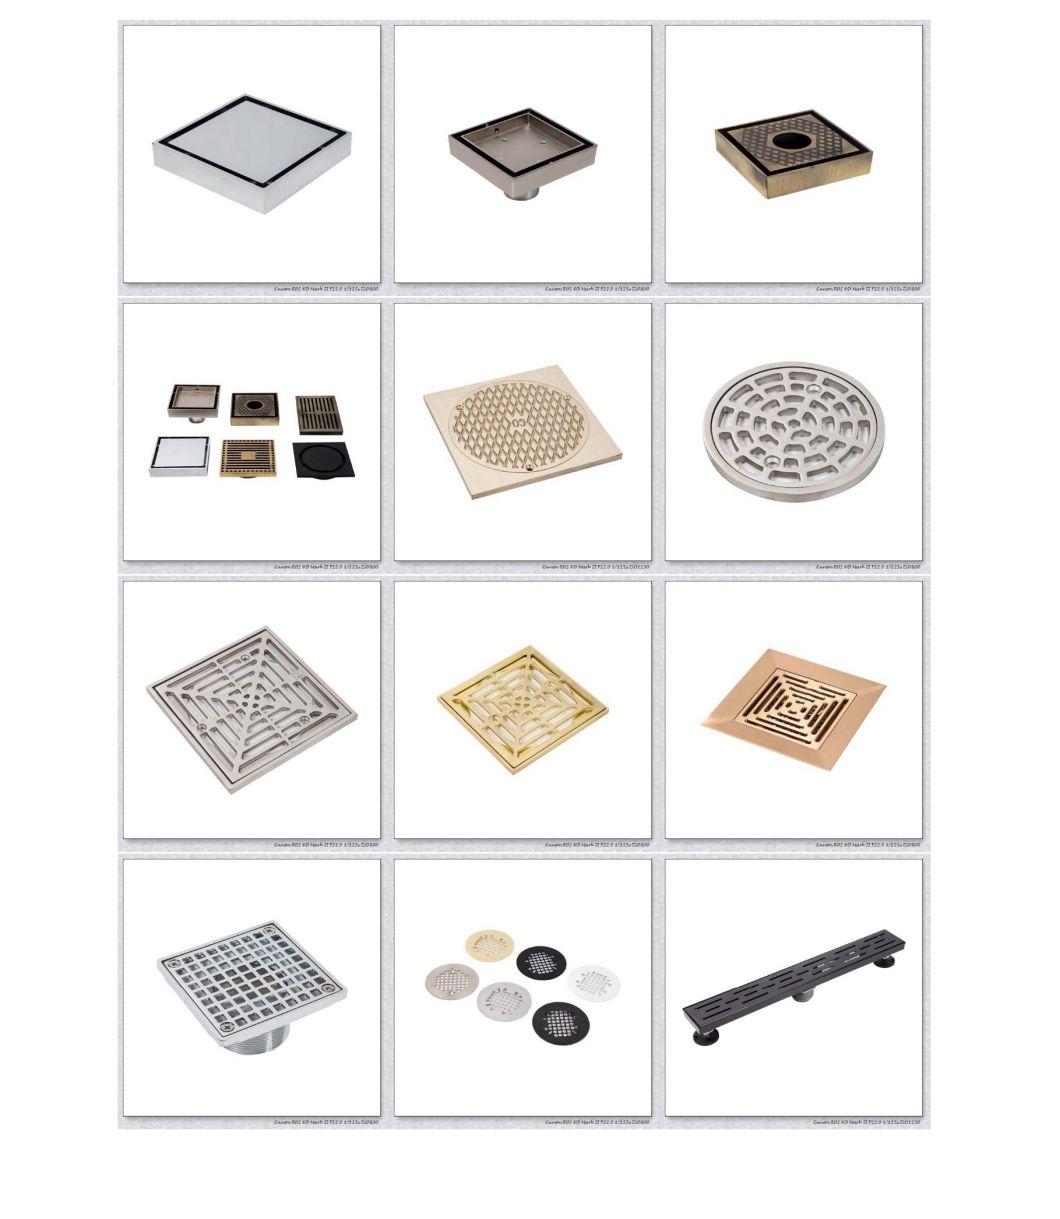 Removable Square Shower Drain Cover